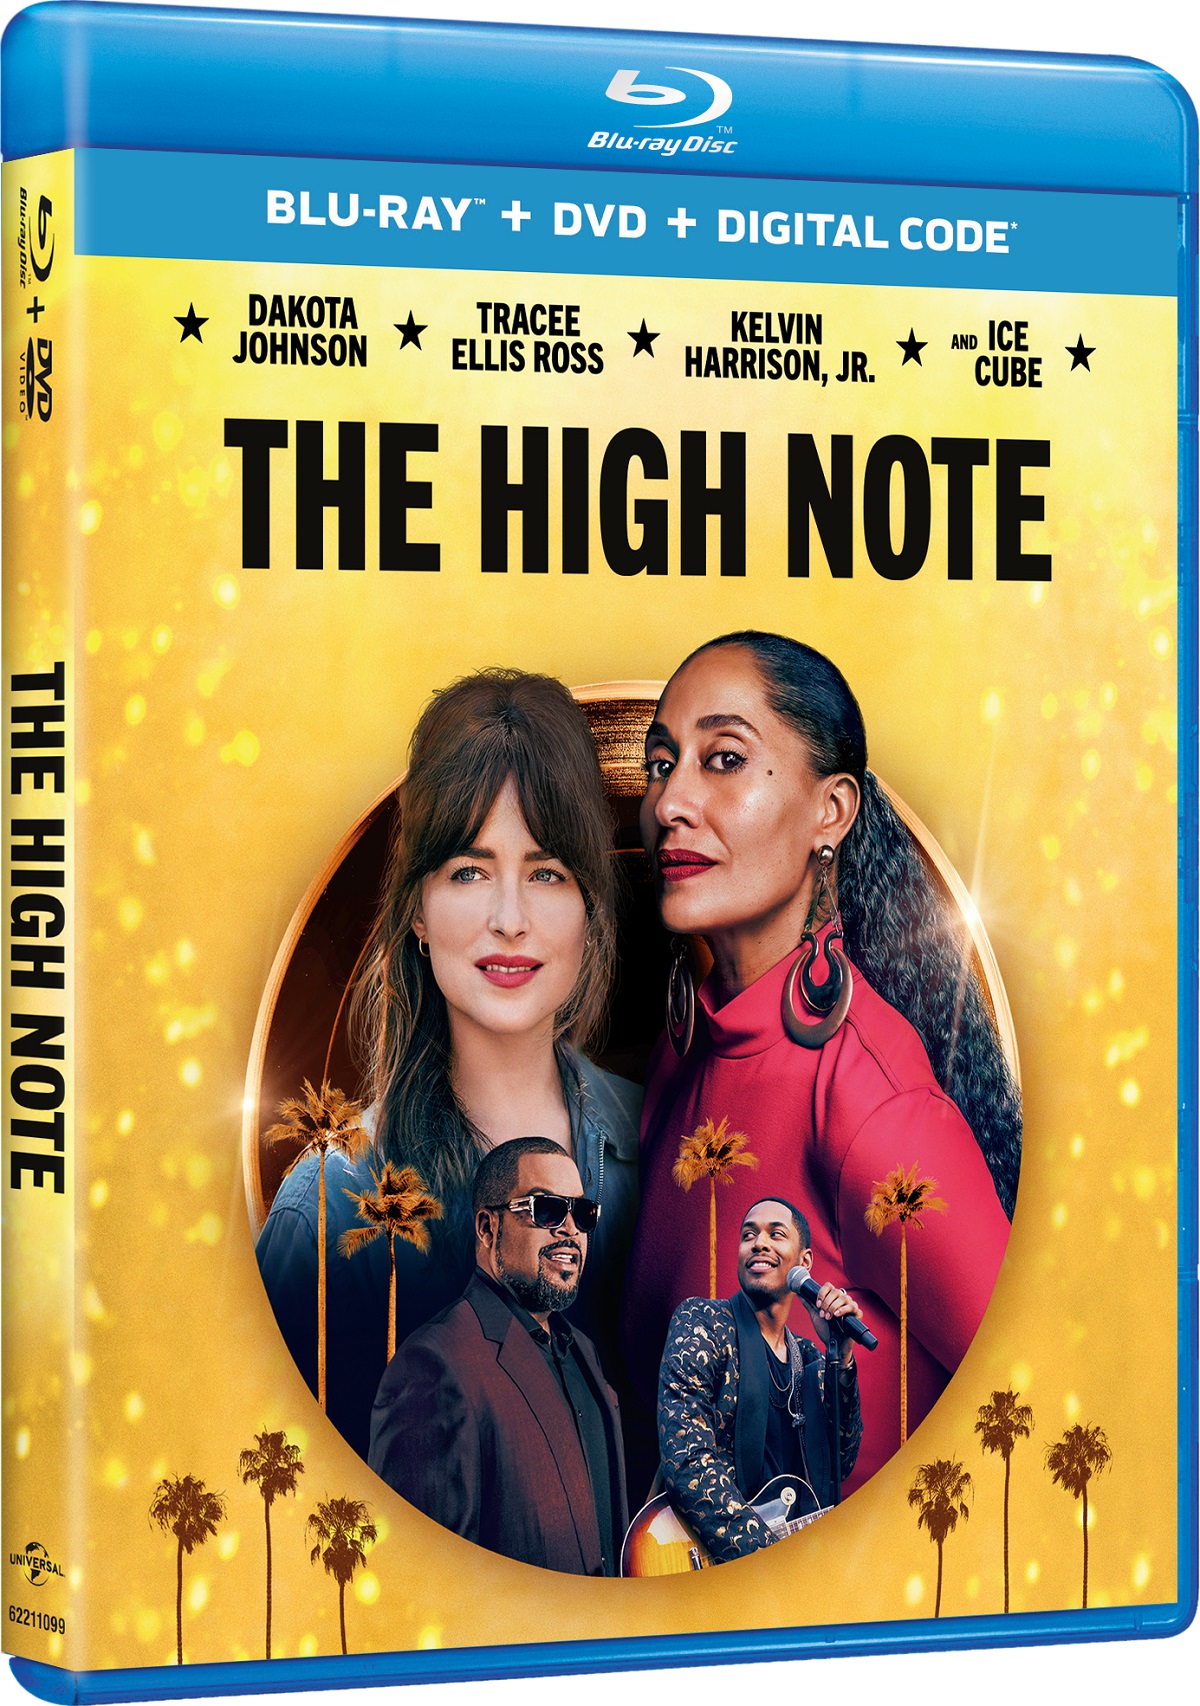 The High Note Blu-ray